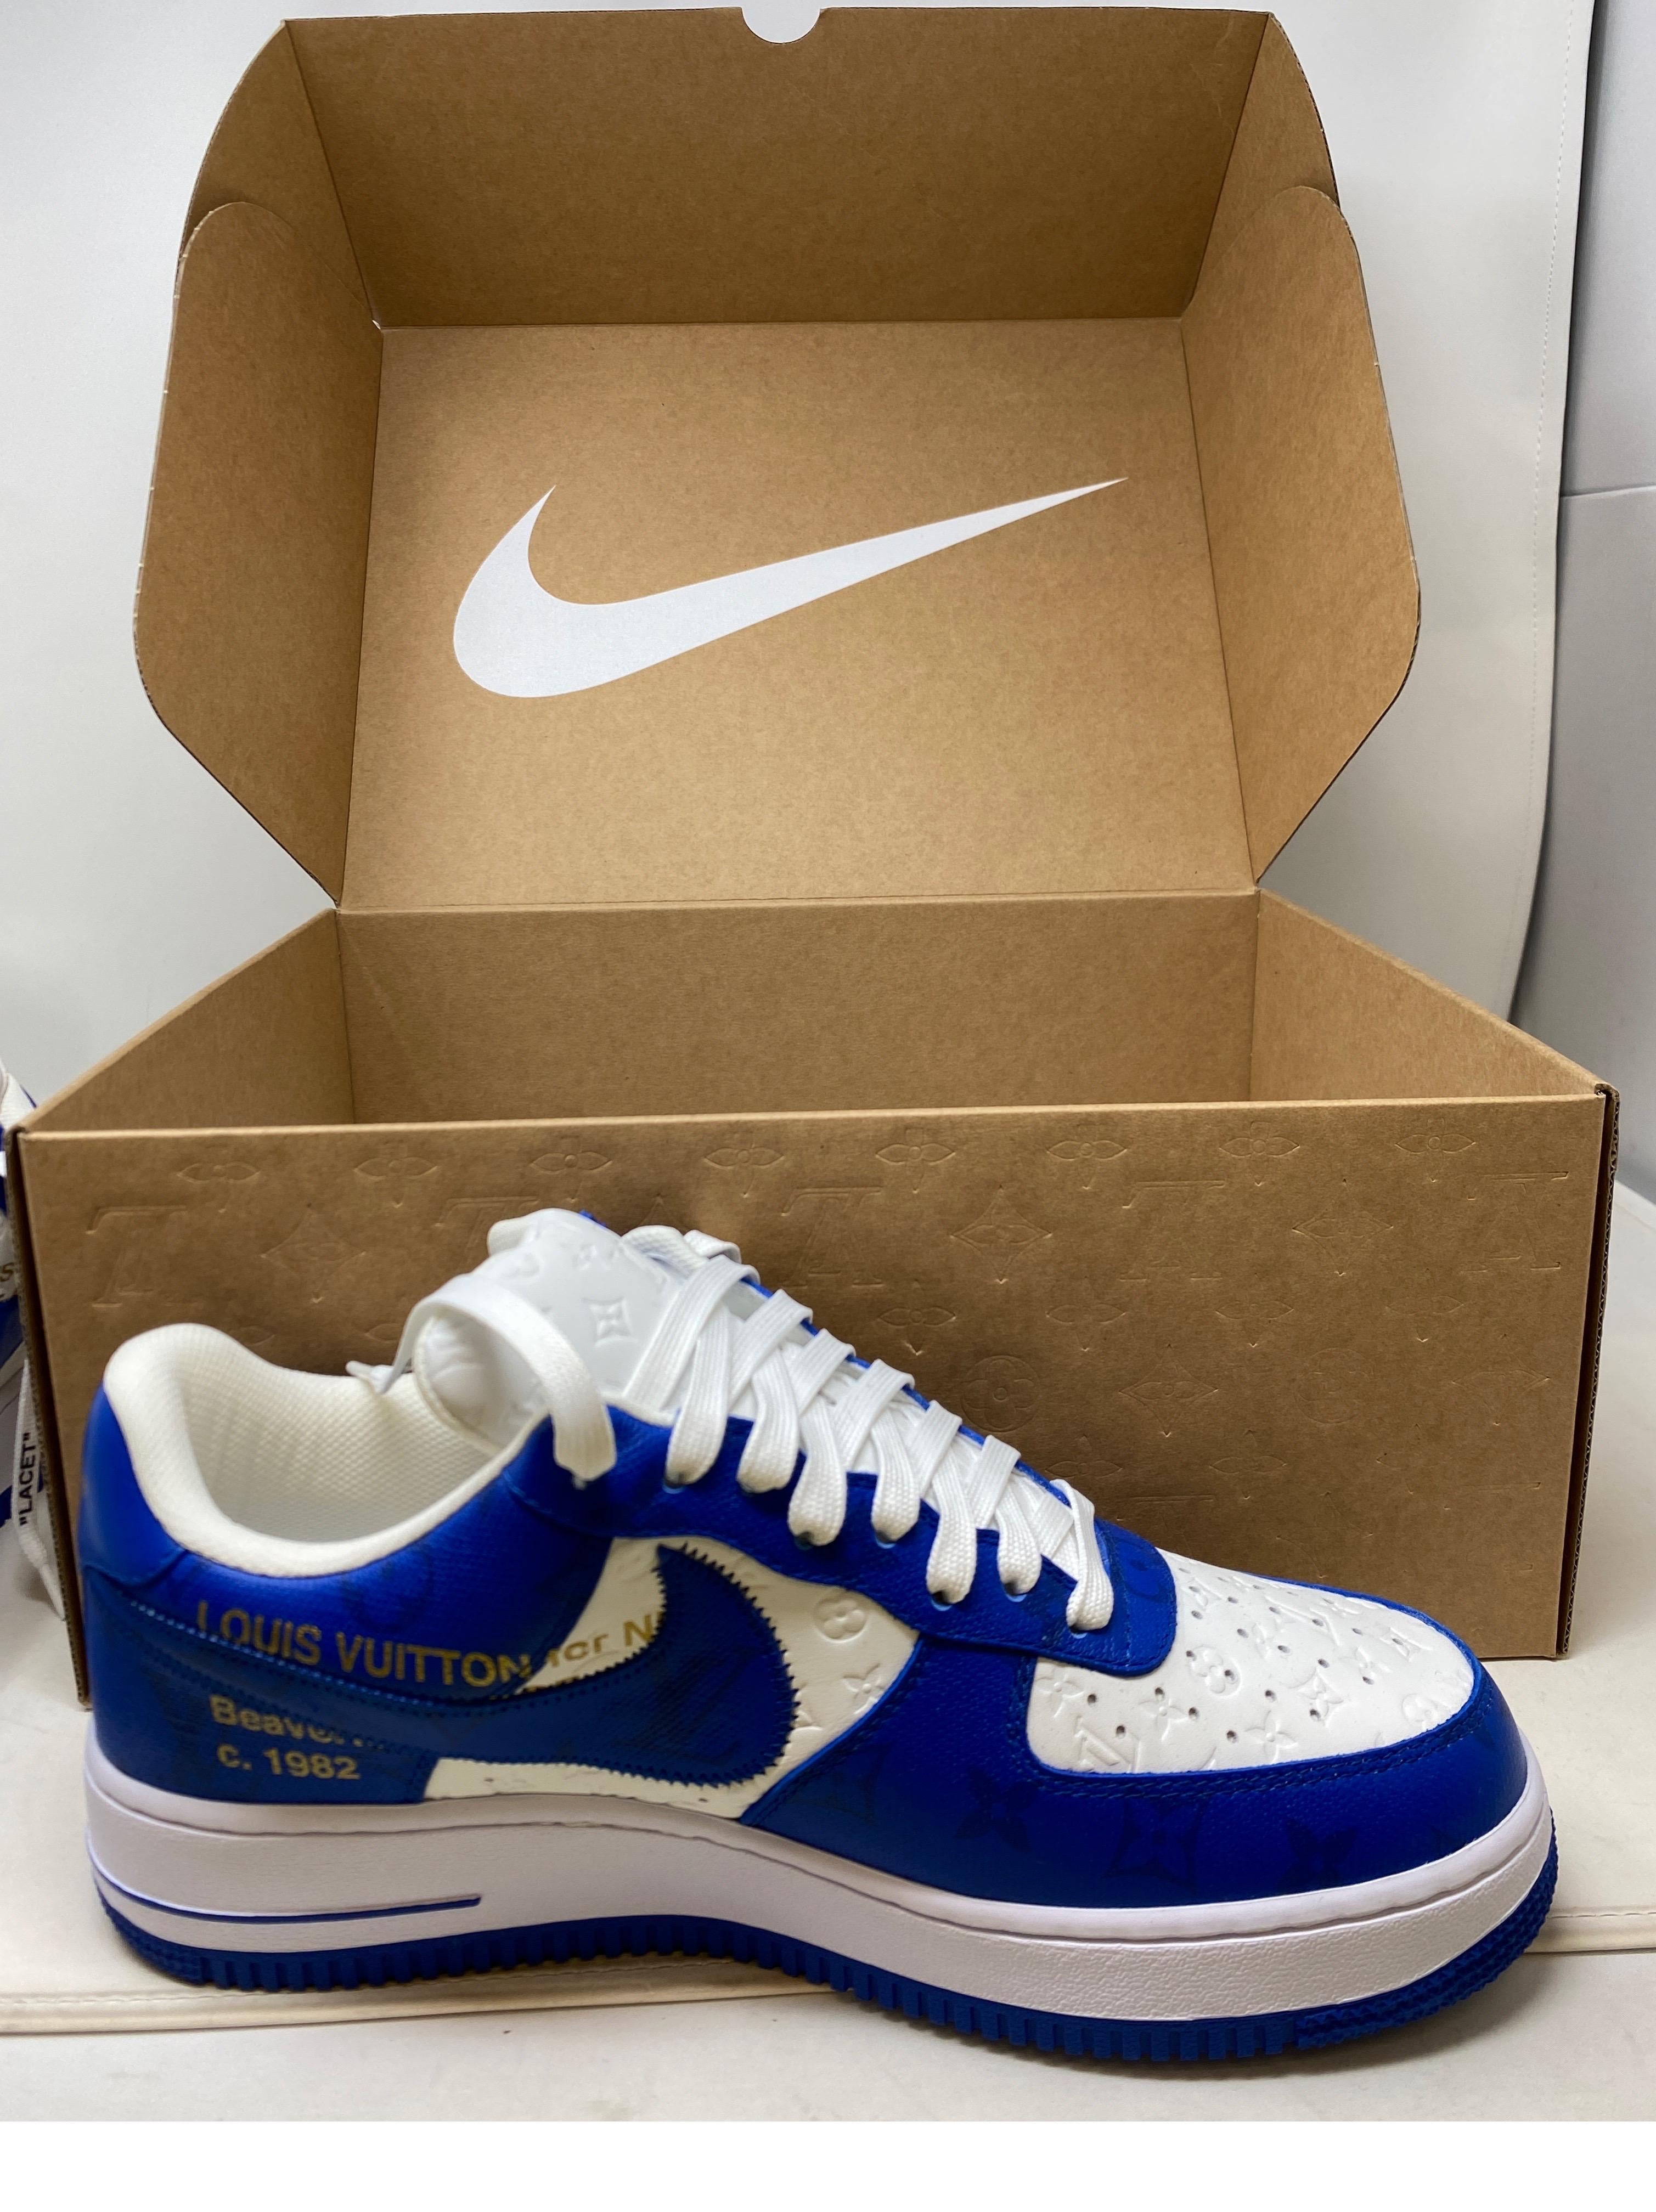 Louis Vuitton For Nike Air Force Ones Blue Shoes  14